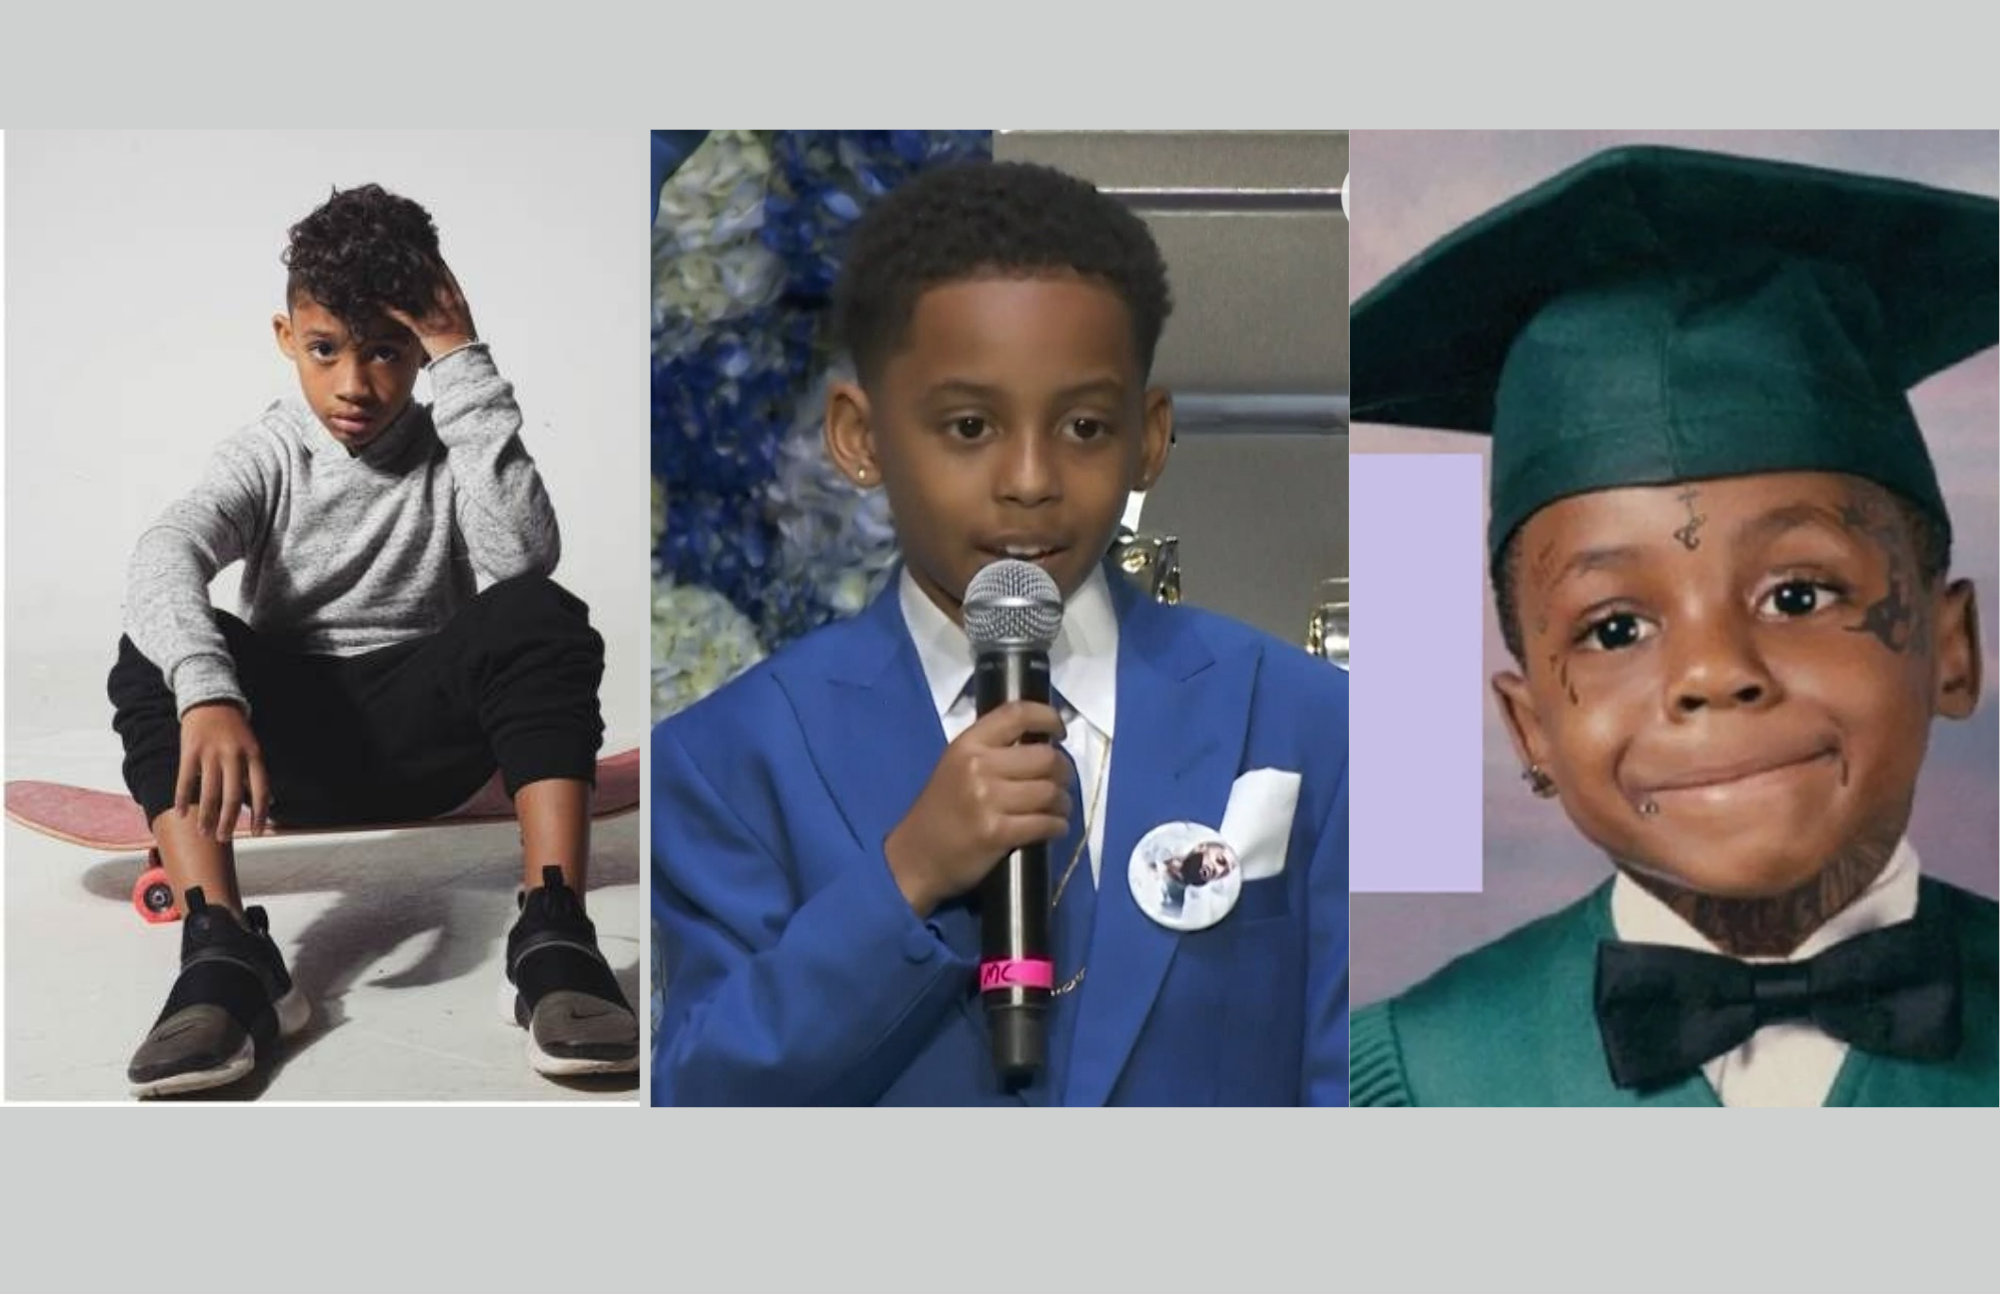 The three sons of Lil Wayne which are Dwayne, Cameron, and Neal Carter